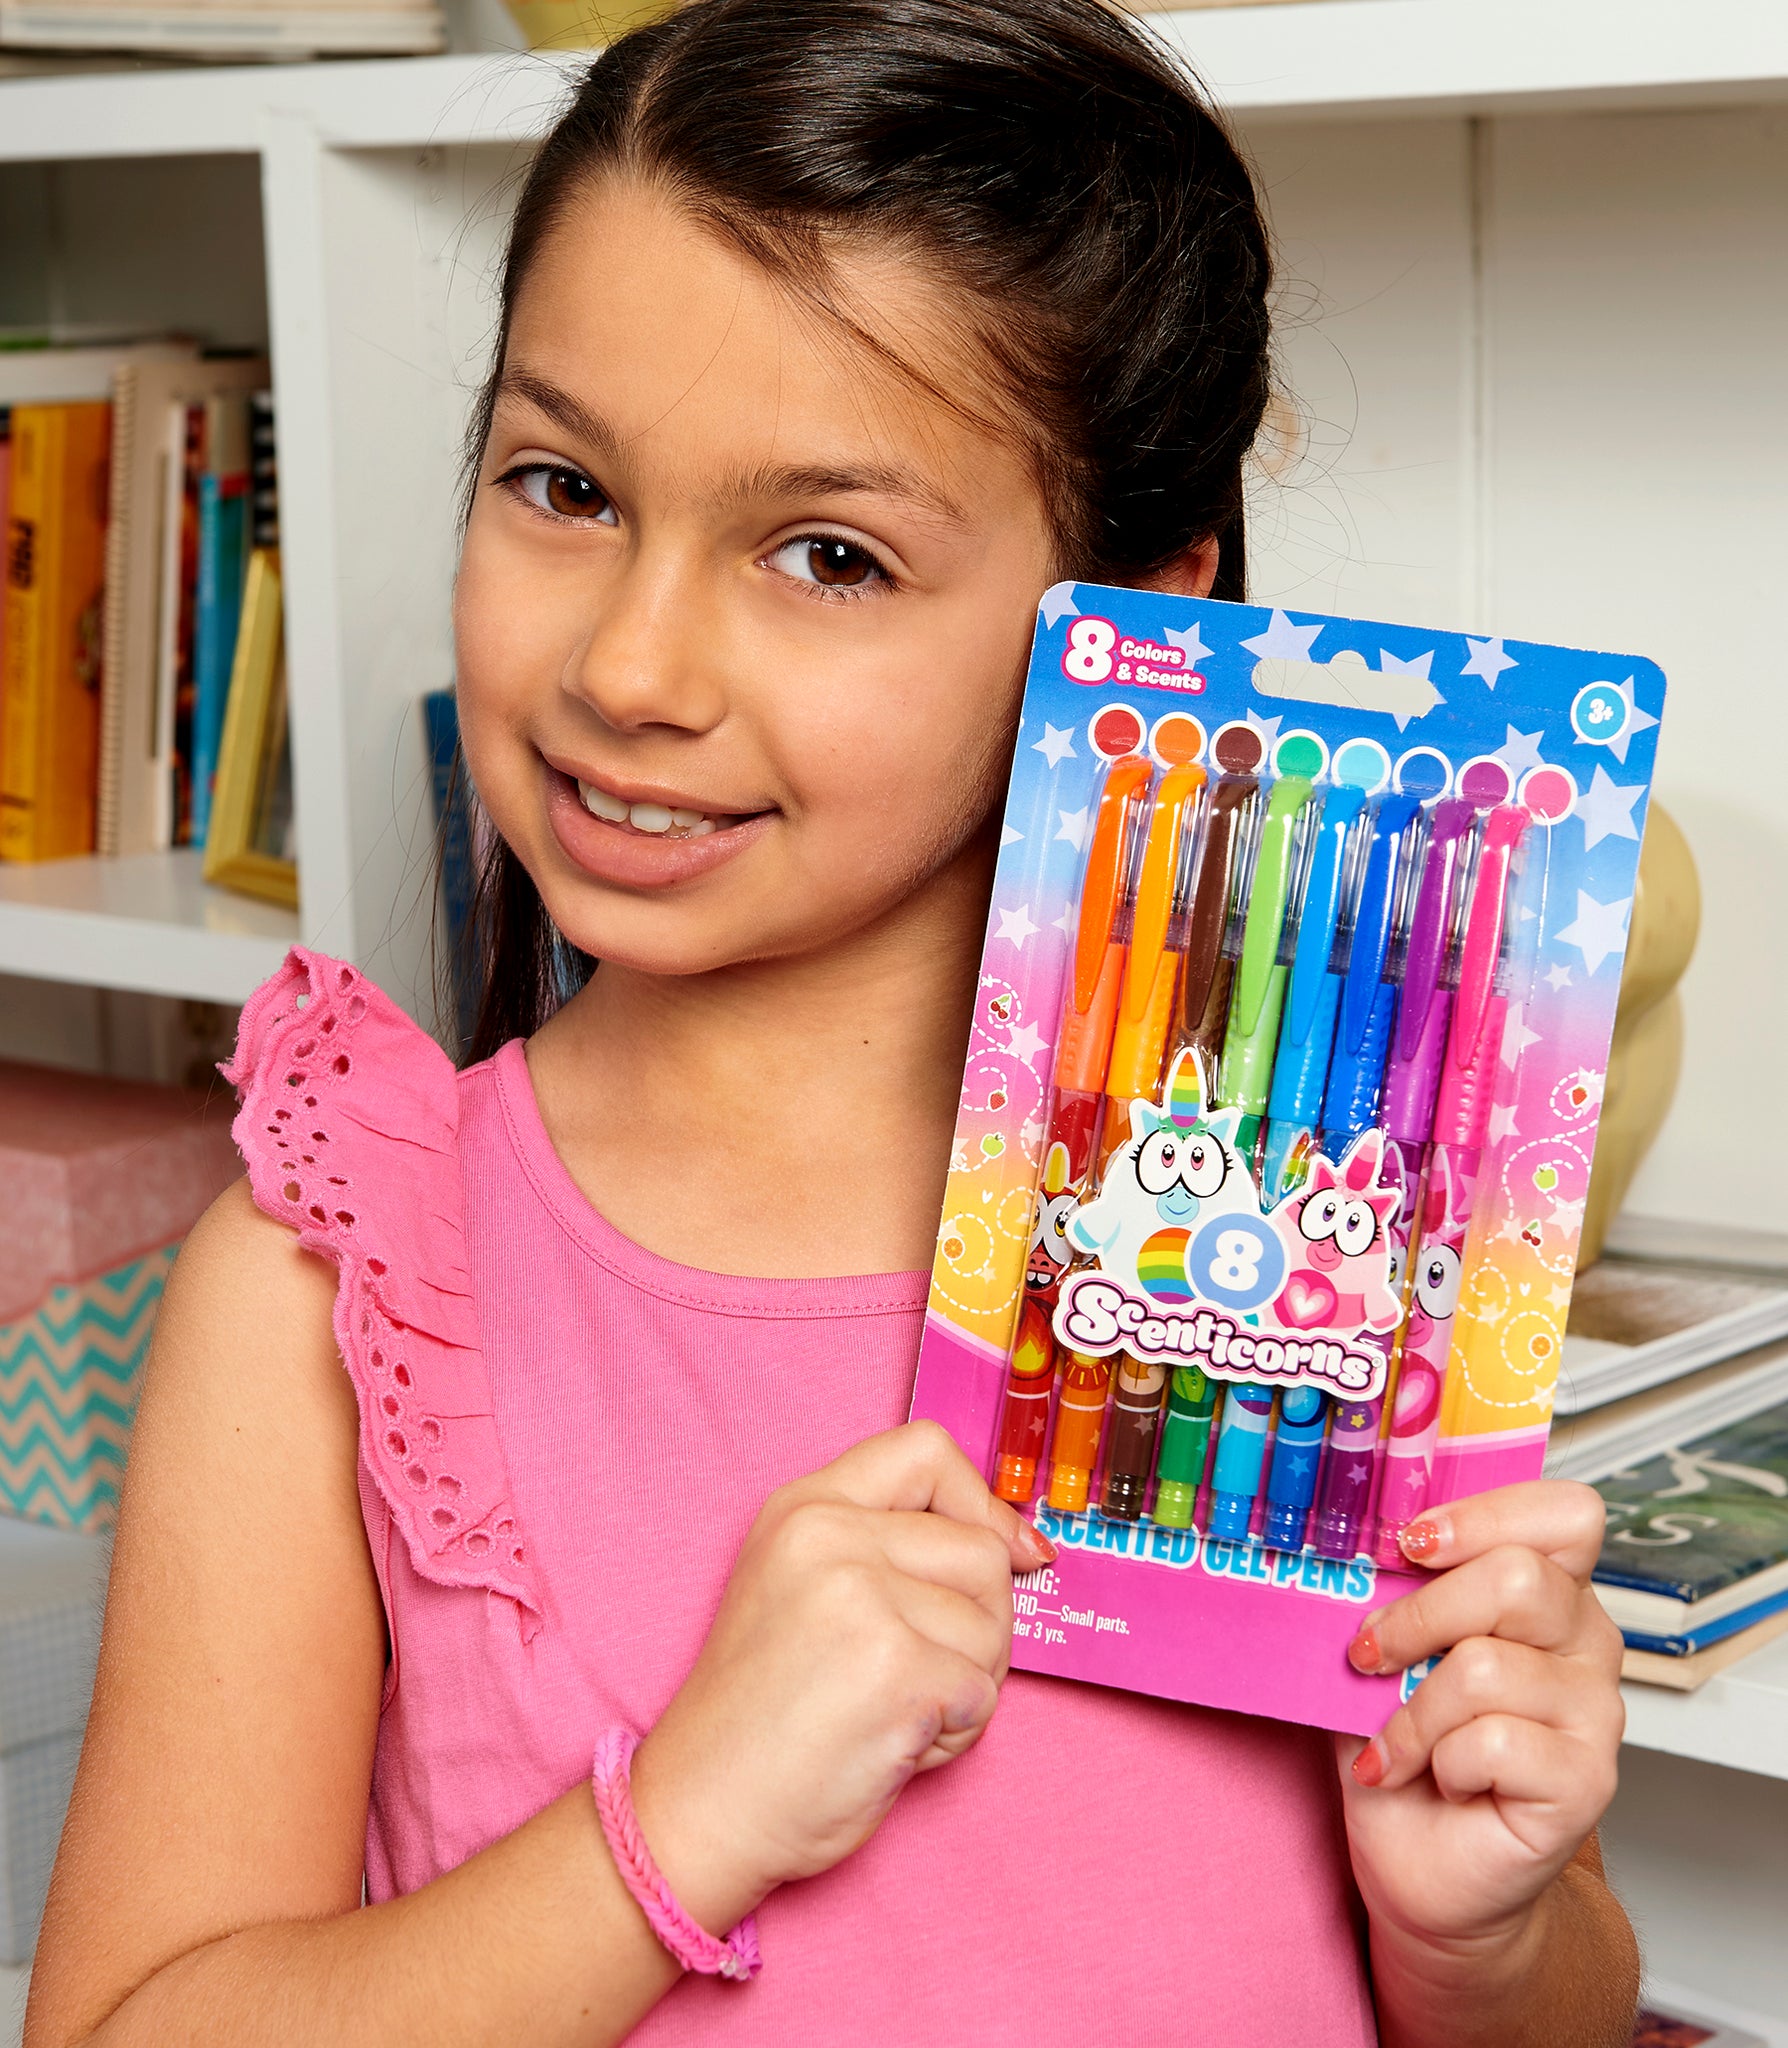 Reese's 5ct. Gel Pens – Kangaru Toys and Stationery